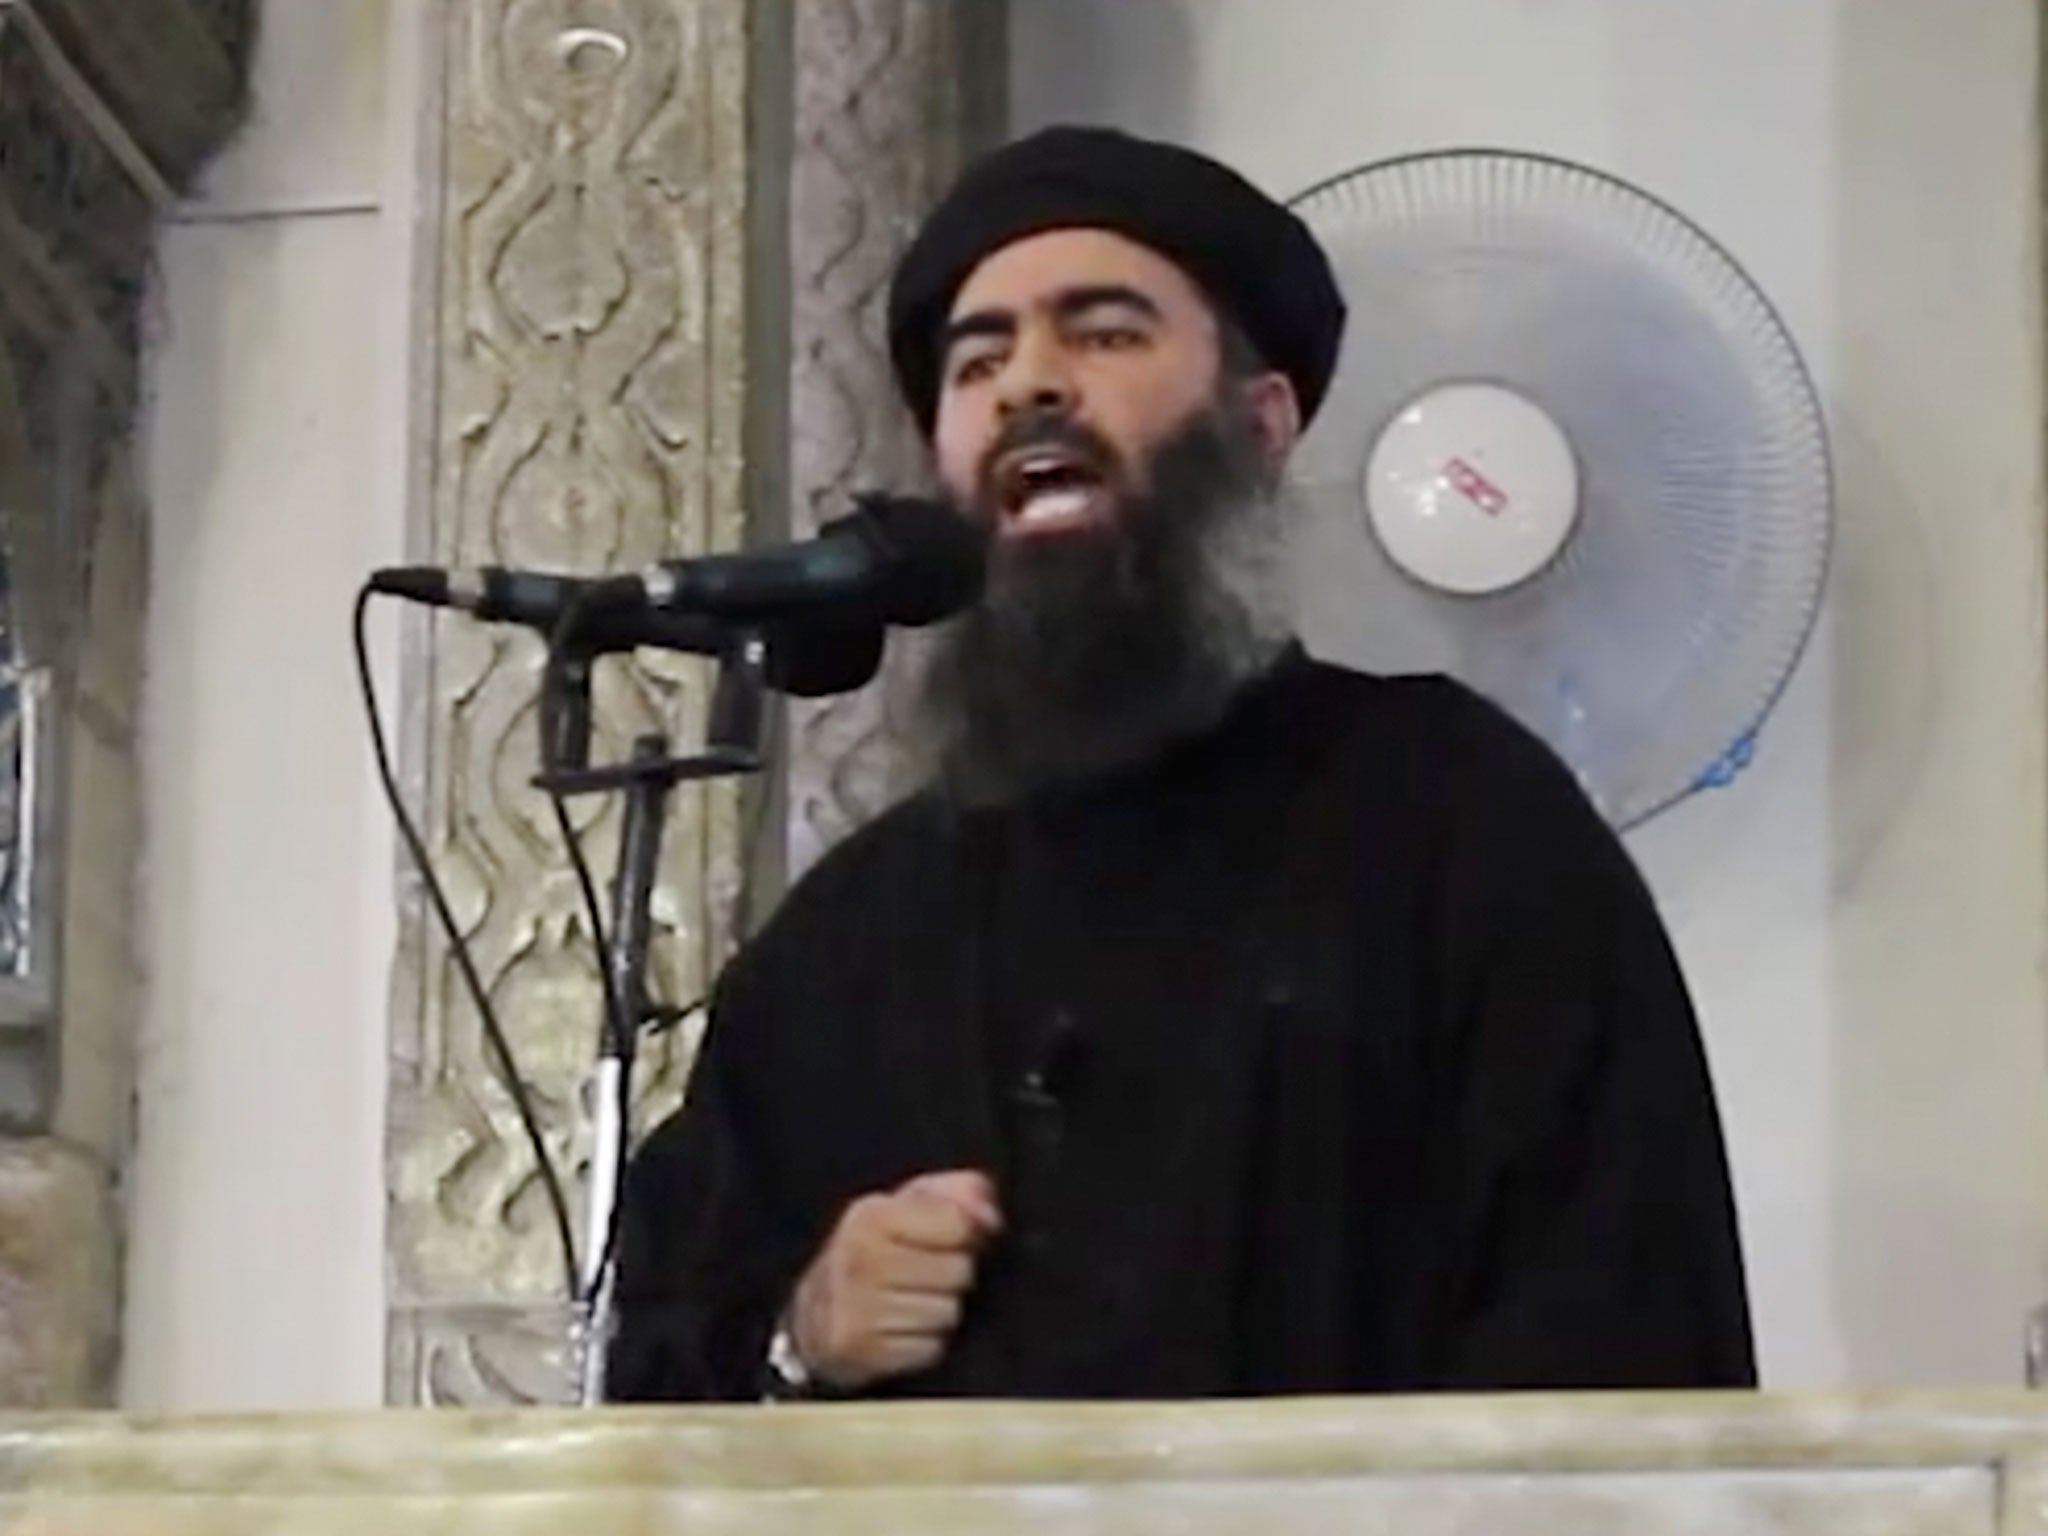 Isis leader Abu Bakr al-Baghdadi reportedly made a 17-minute audio statement yesterday vowing the group will fight until the last – and calling for the ongoing violence to continue